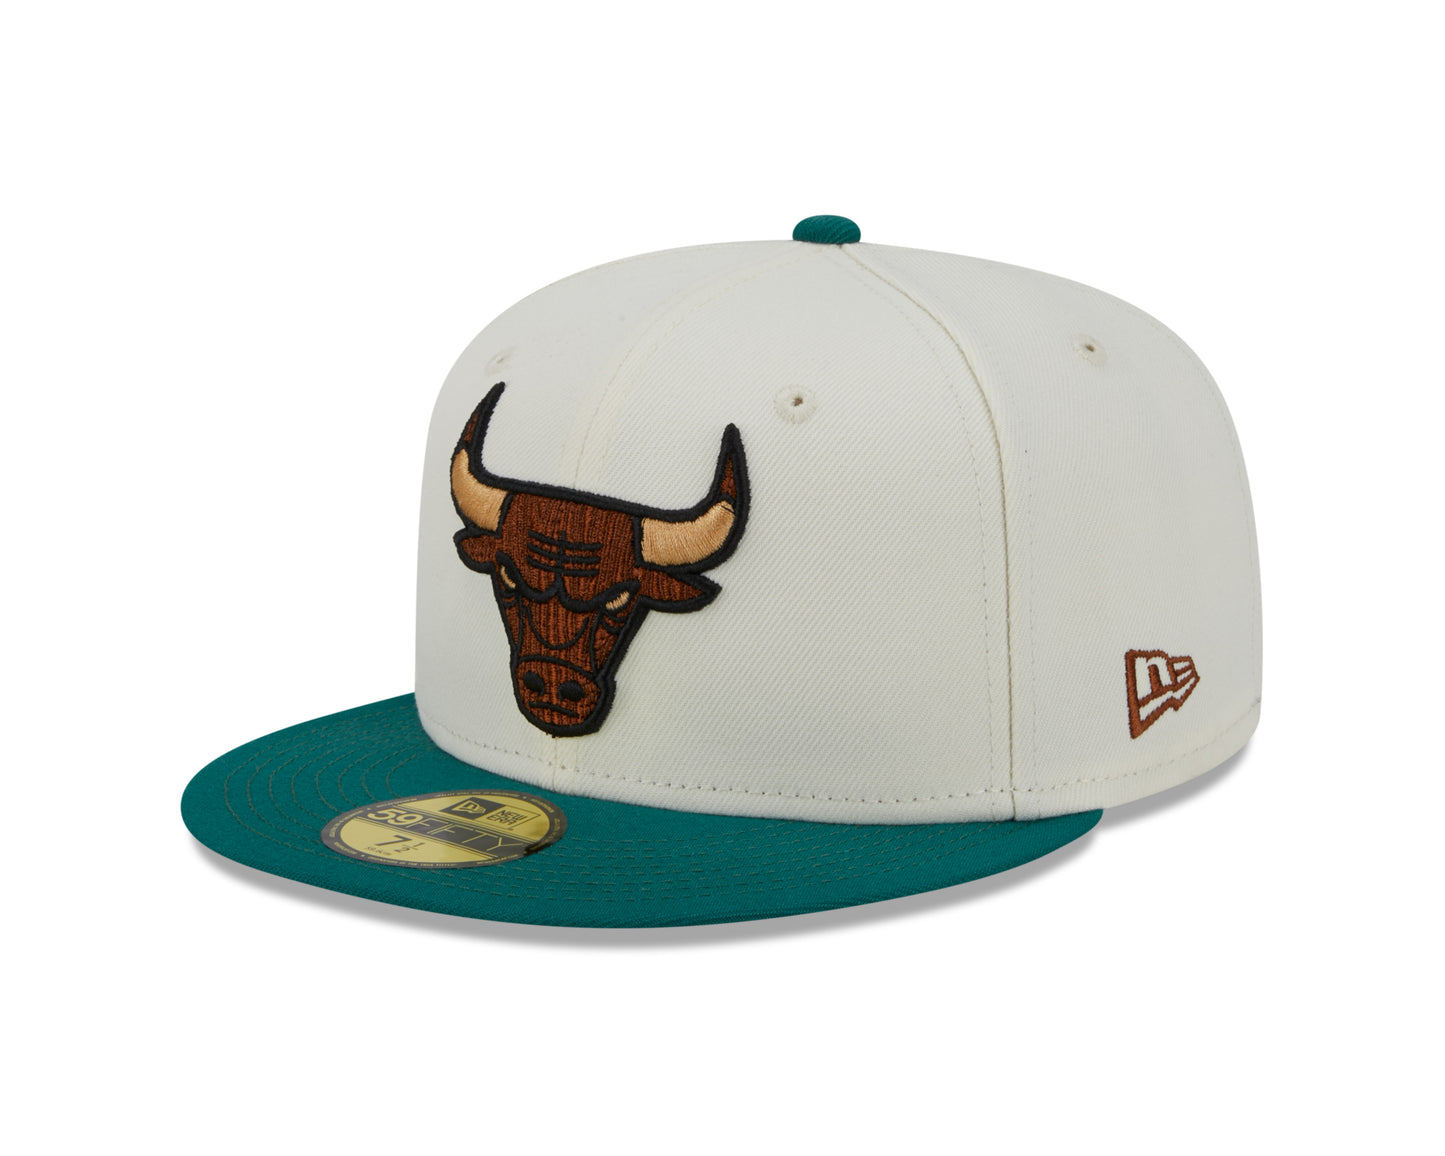 New Era - 59Fifty Fitted Cap - CAMP - Chicago Bulls - White/Green - Headz Up 